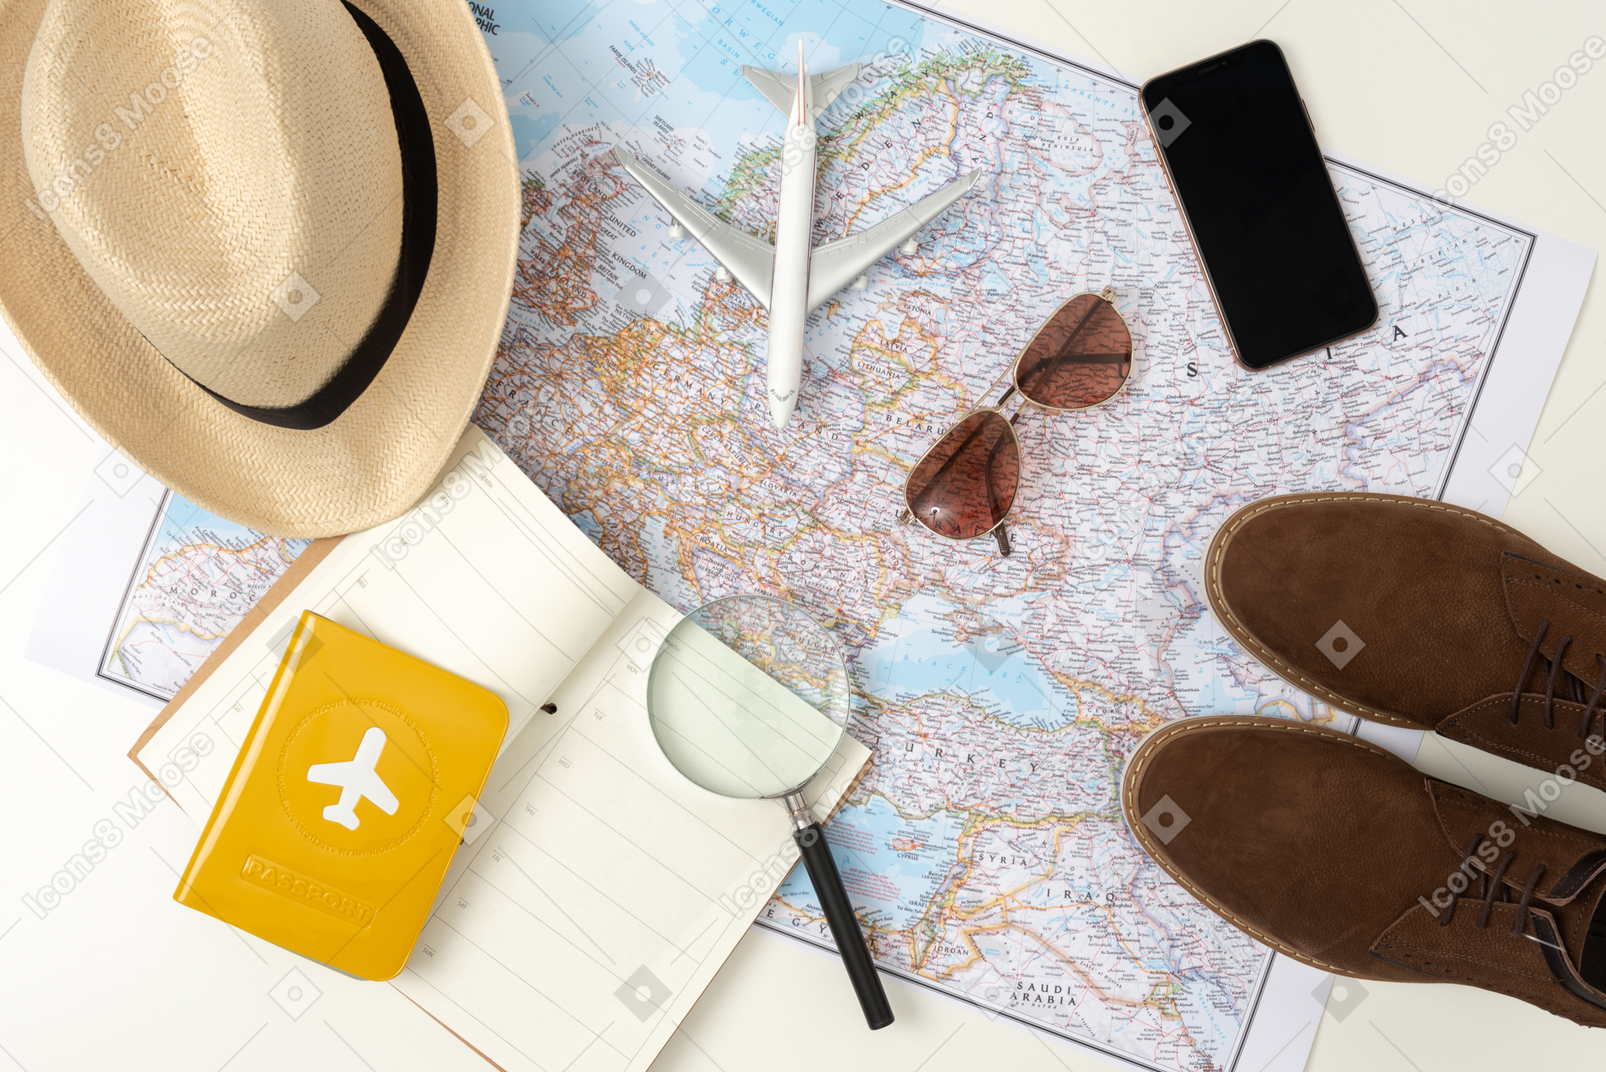 Your standard travel kit (don't forget the plain!), with the straw hat, comfortable boots, smartphone and sunglasses